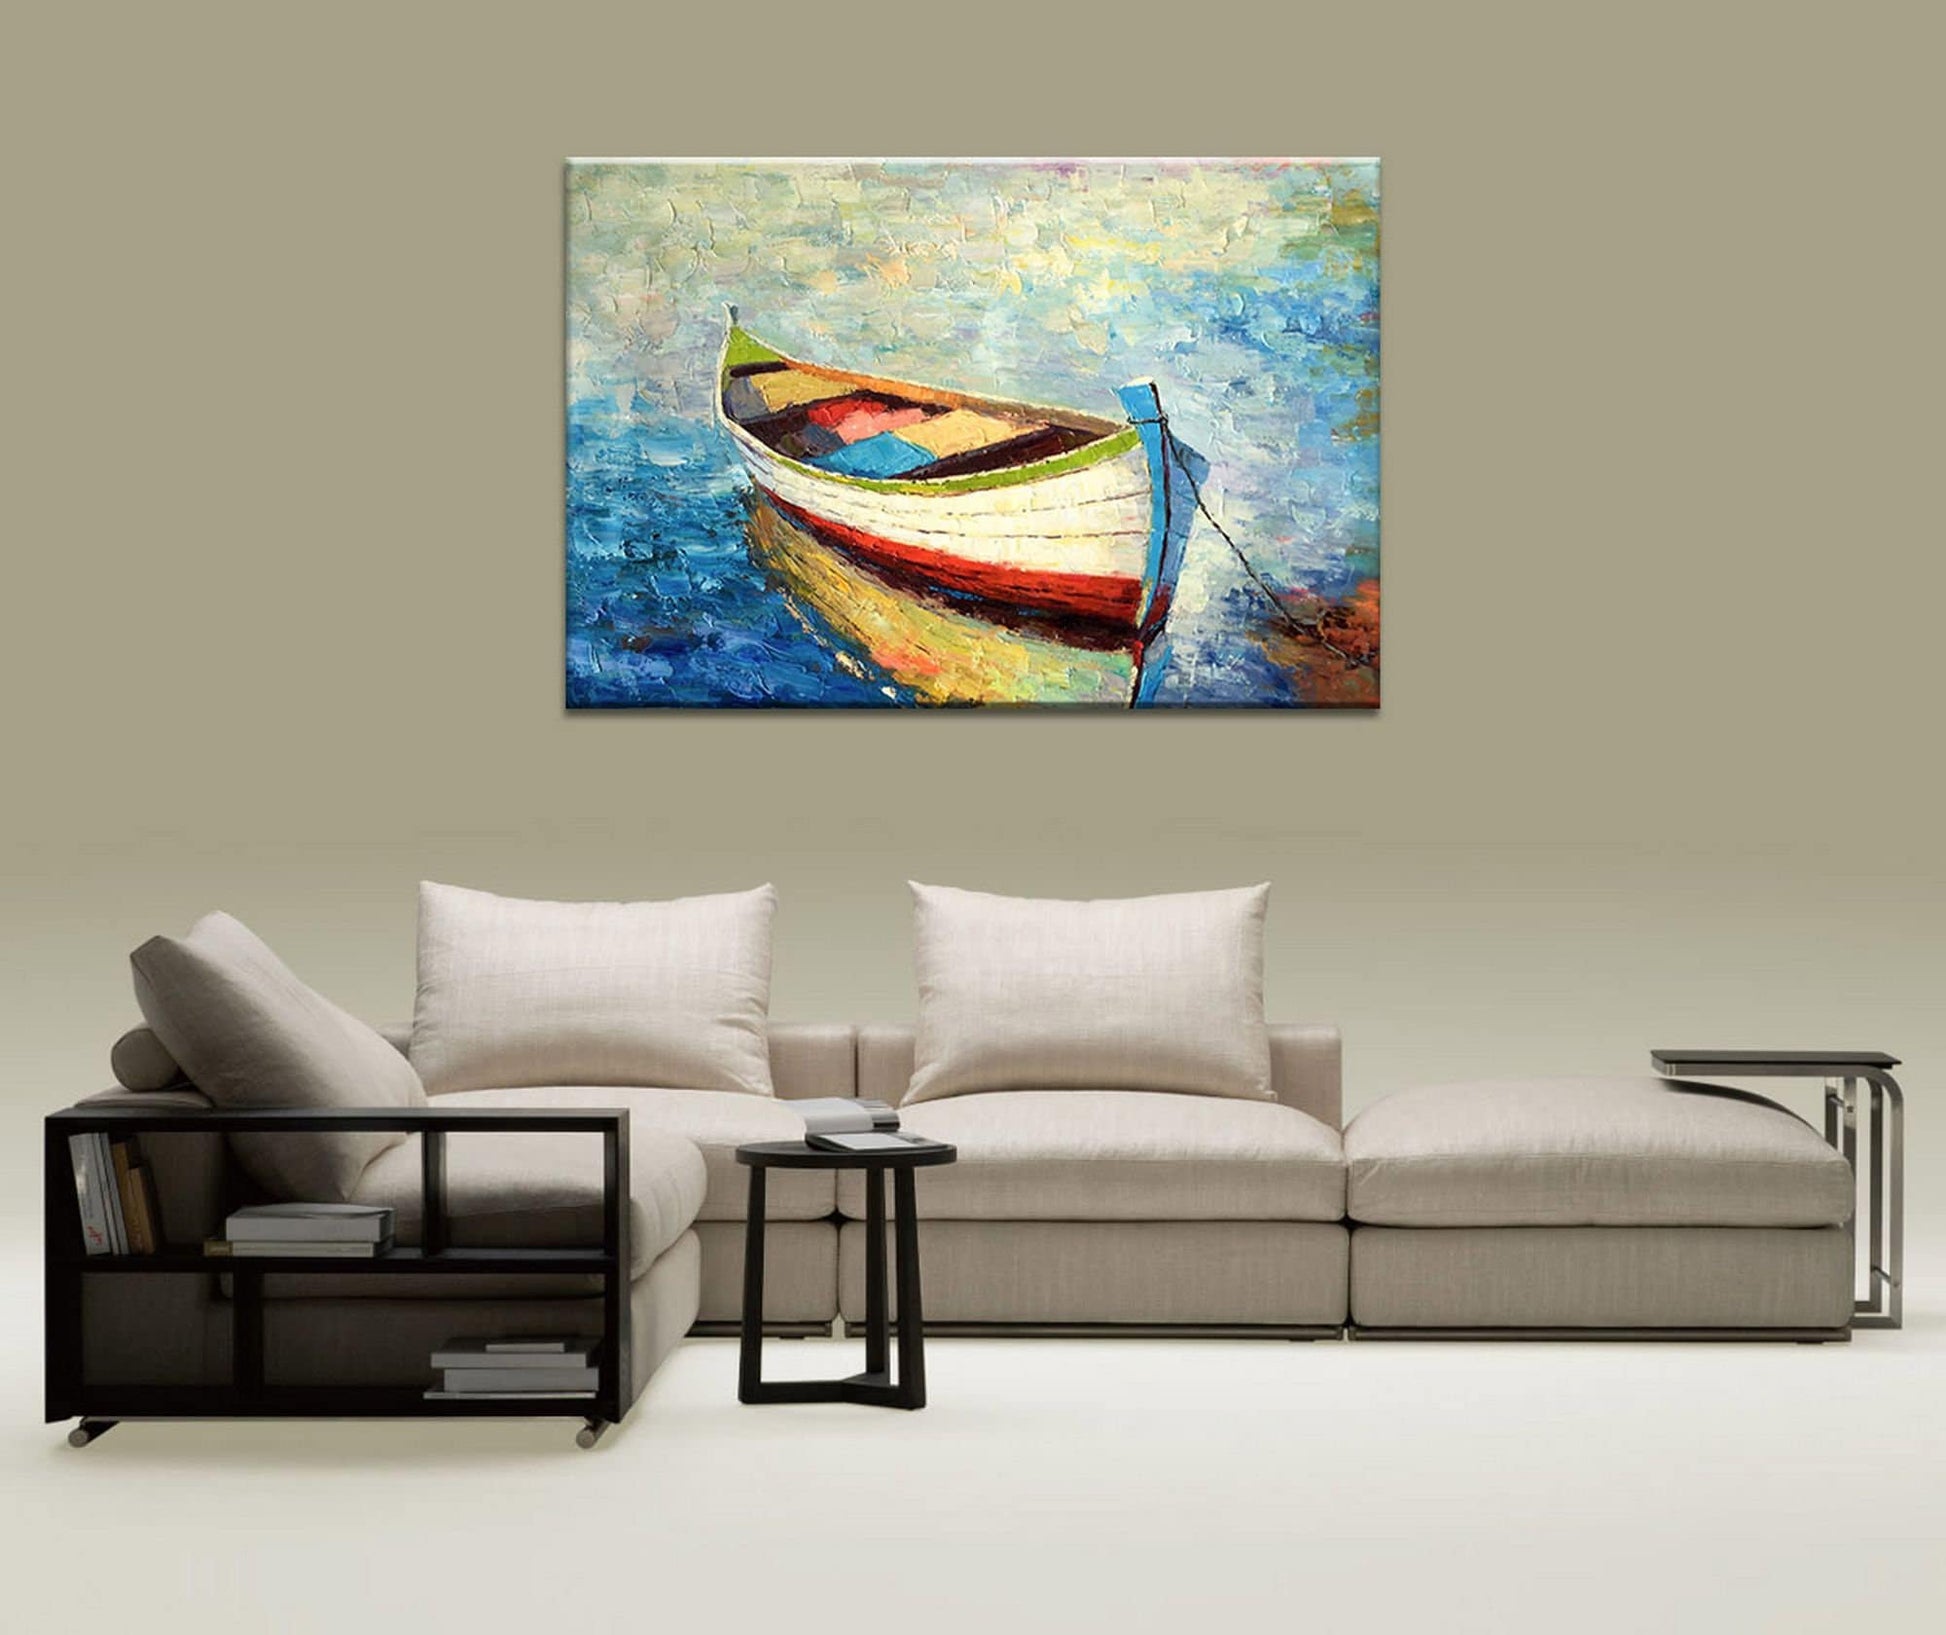 Large Oil Painting Fishing Boat Seascape Bedroom Decor, Aesthetic